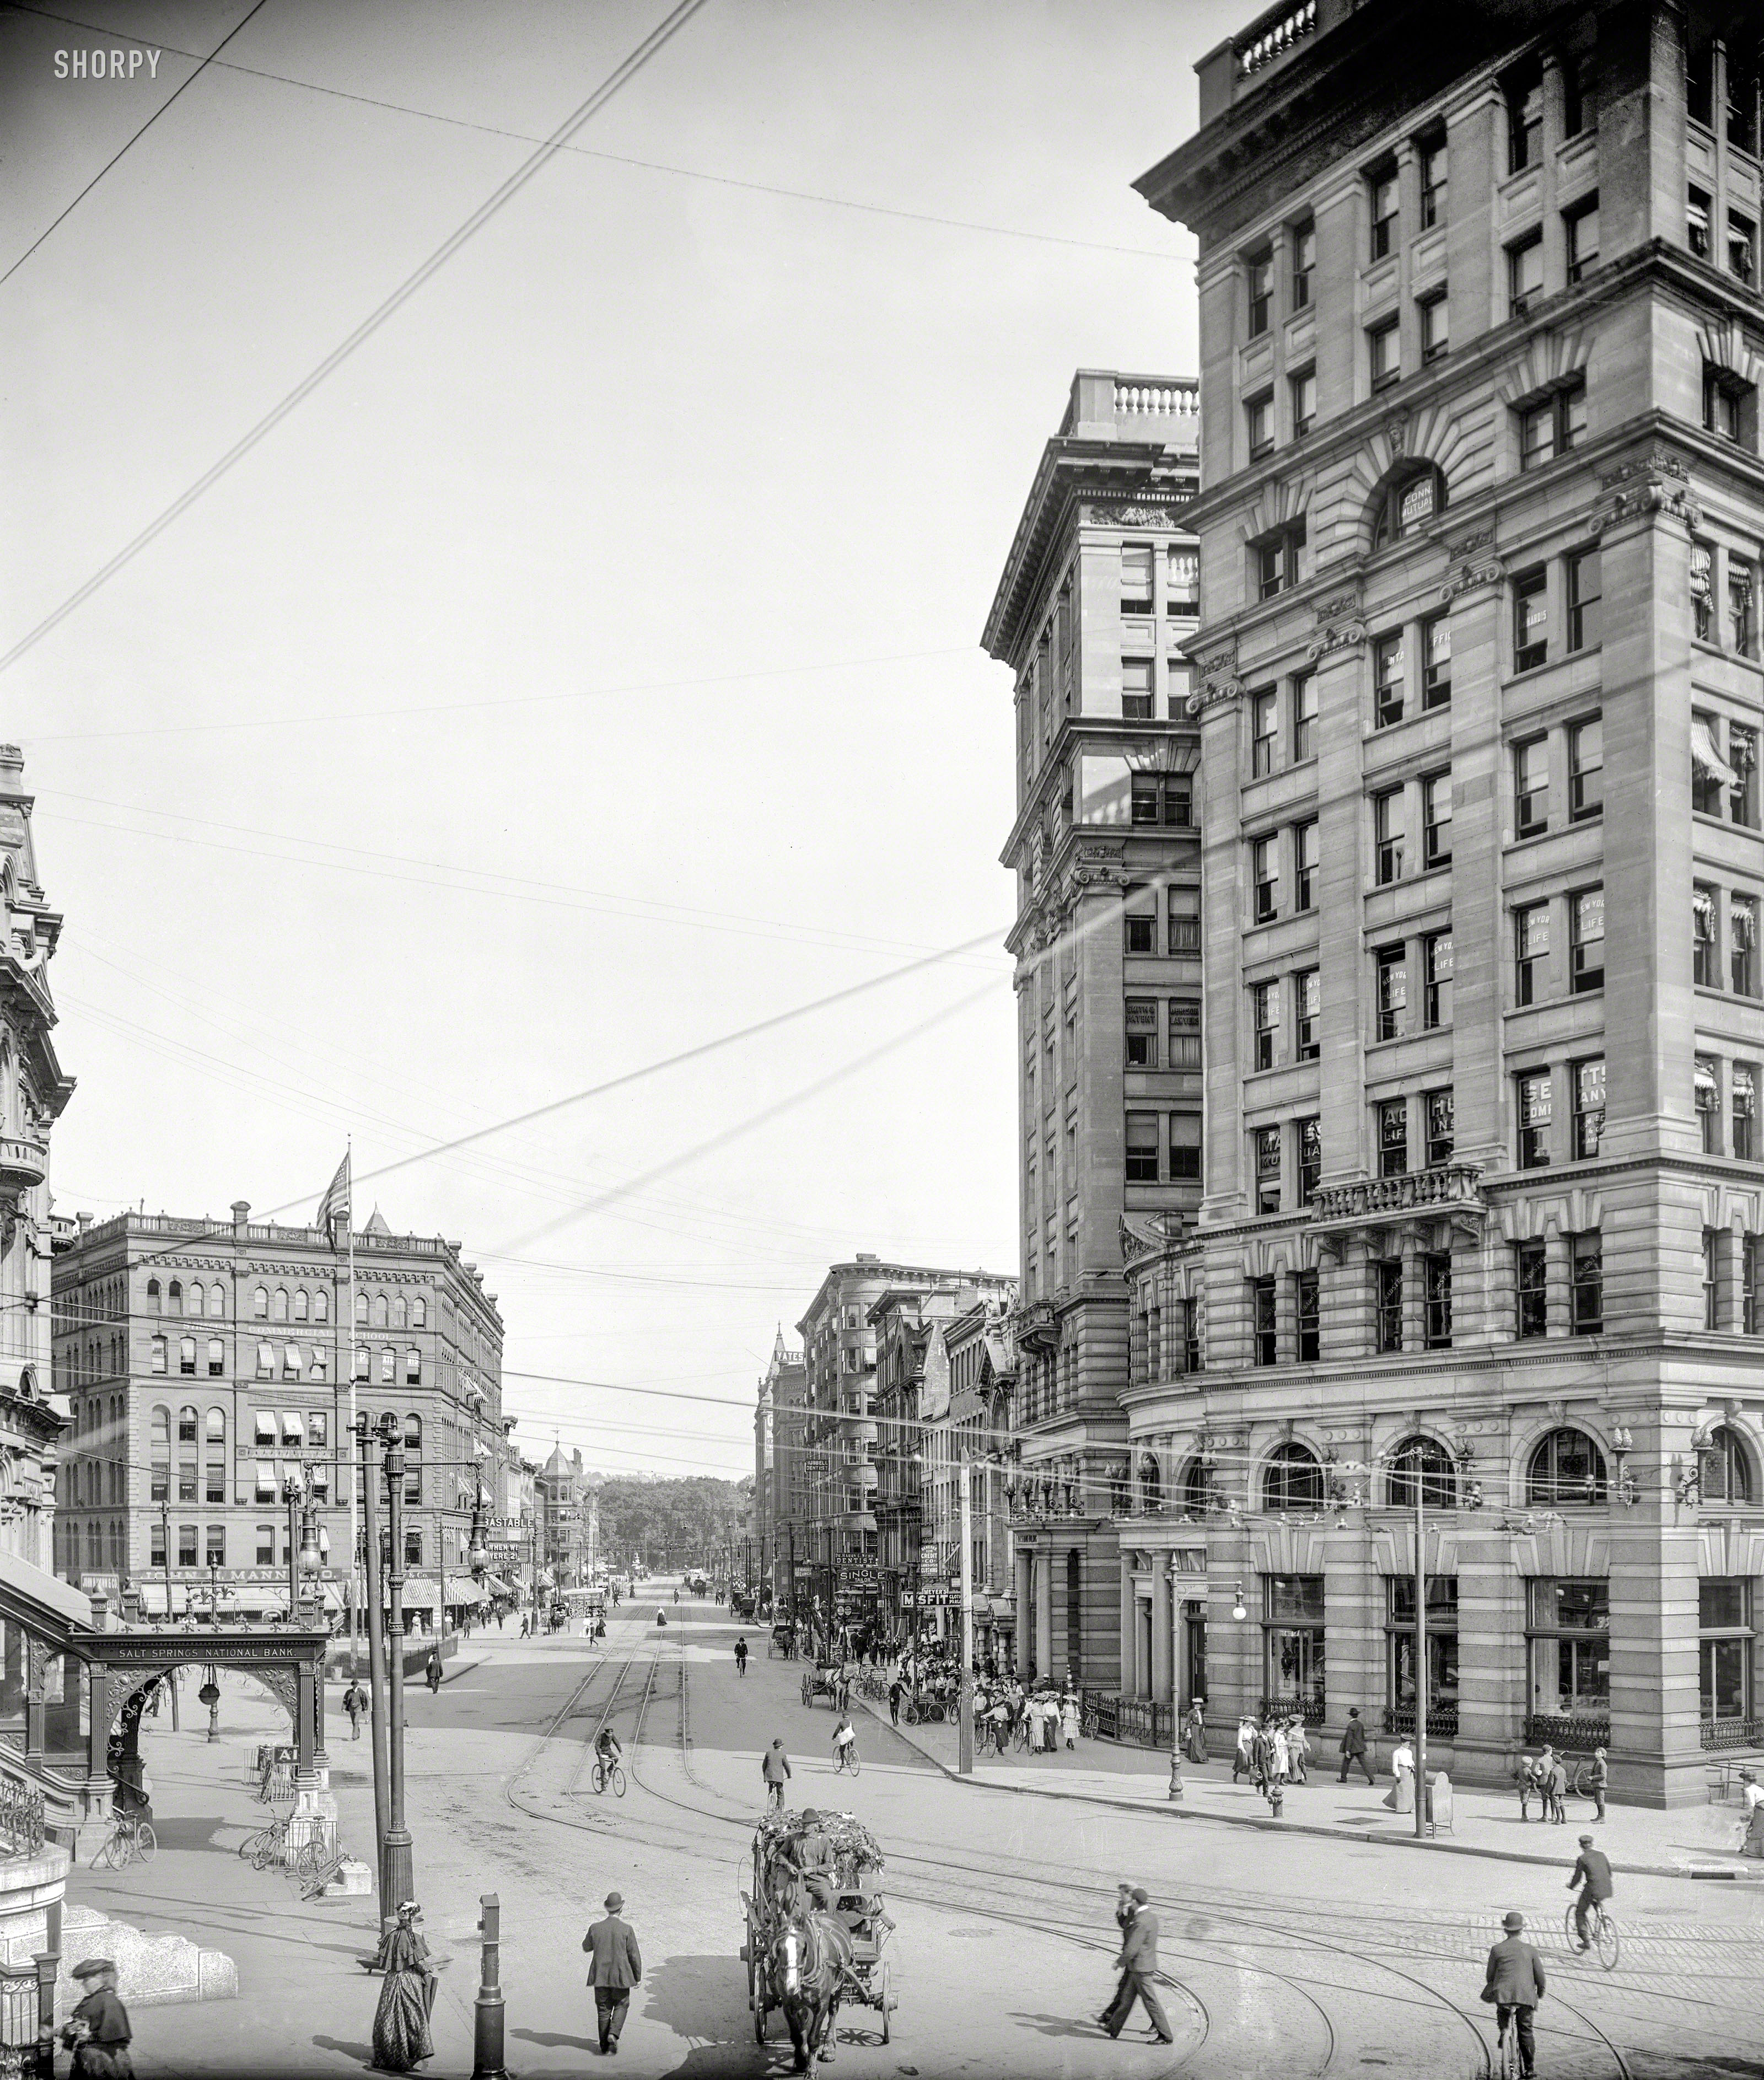 Syracuse, New York, circa 1904. "Genesee Street." Early-1900s standbys include the usual assortment of painless dentists, and a "Misfit" clothing parlor. 8x10 inch dry plate glass negative, Detroit Publishing Company. View full size.